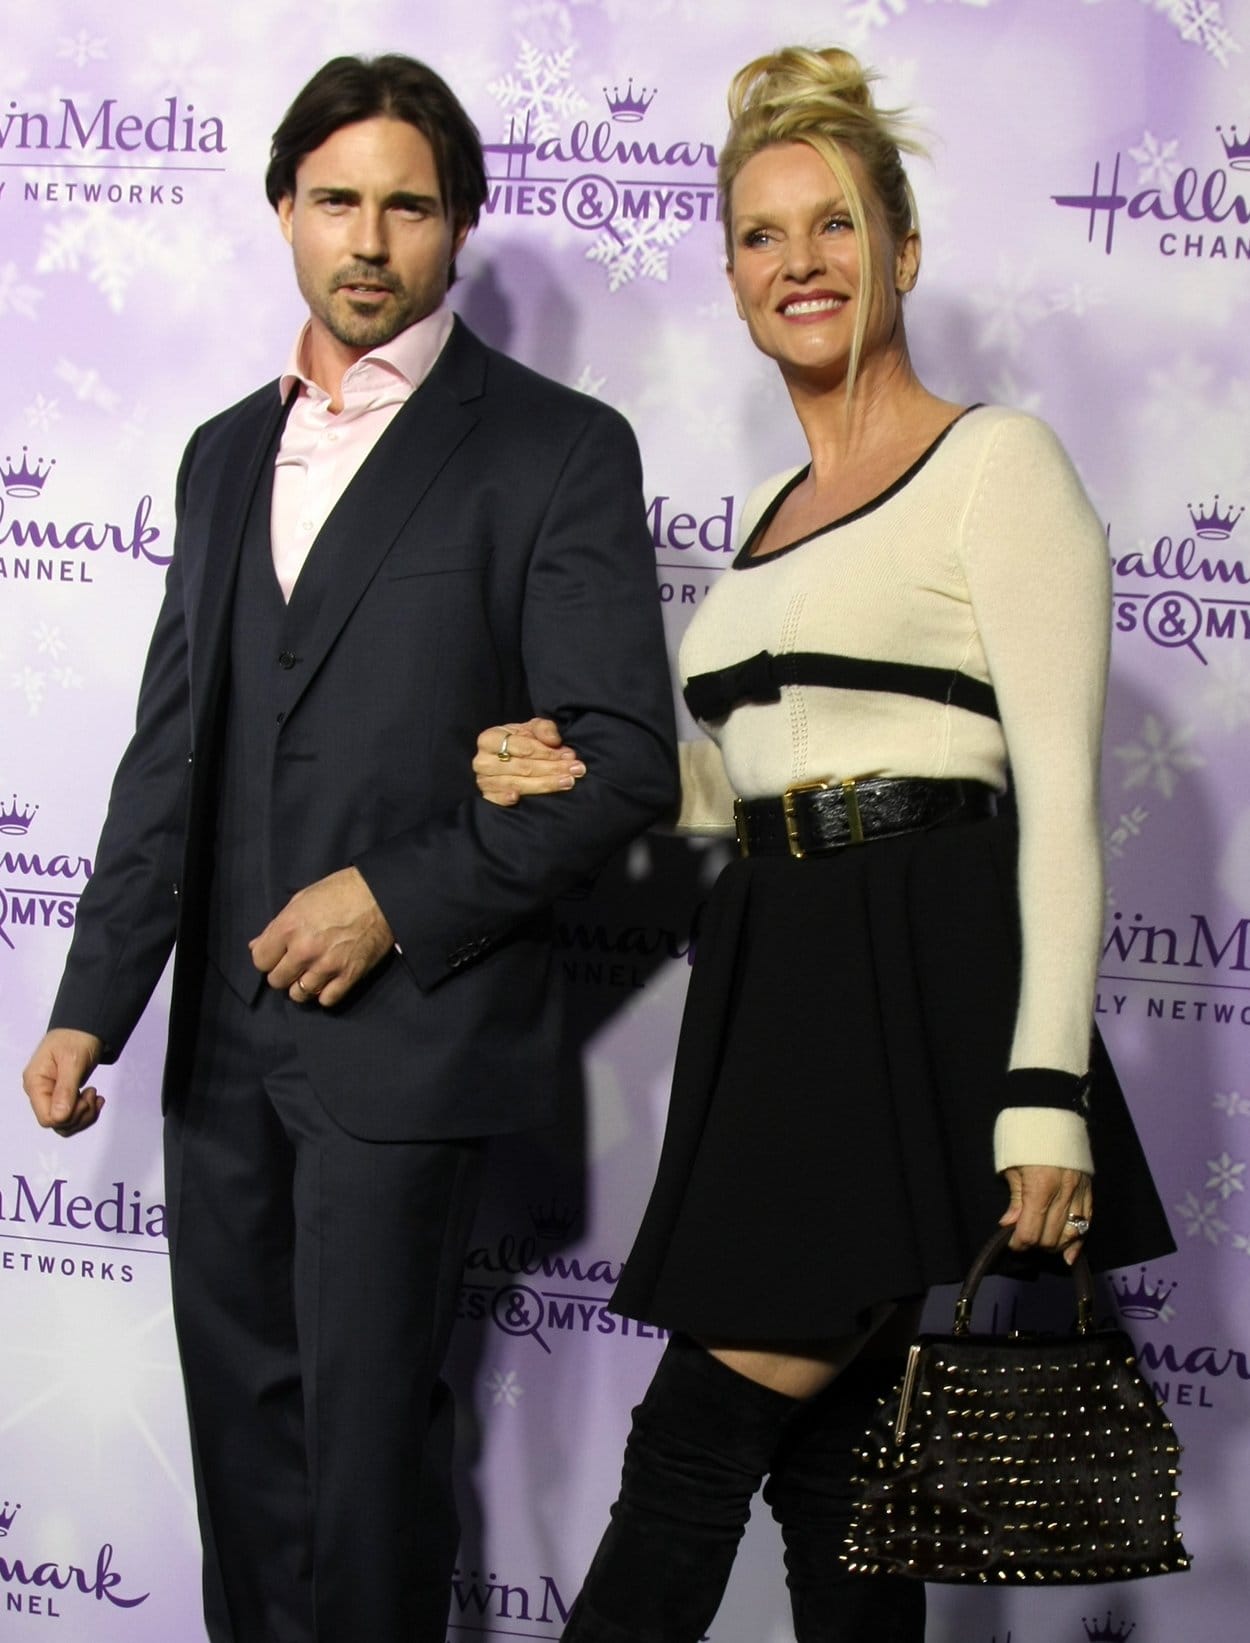 Aaron Phypers and Nicollette Sheridan married in December 2015, separated six months later, and finalized their divorce in August 2018